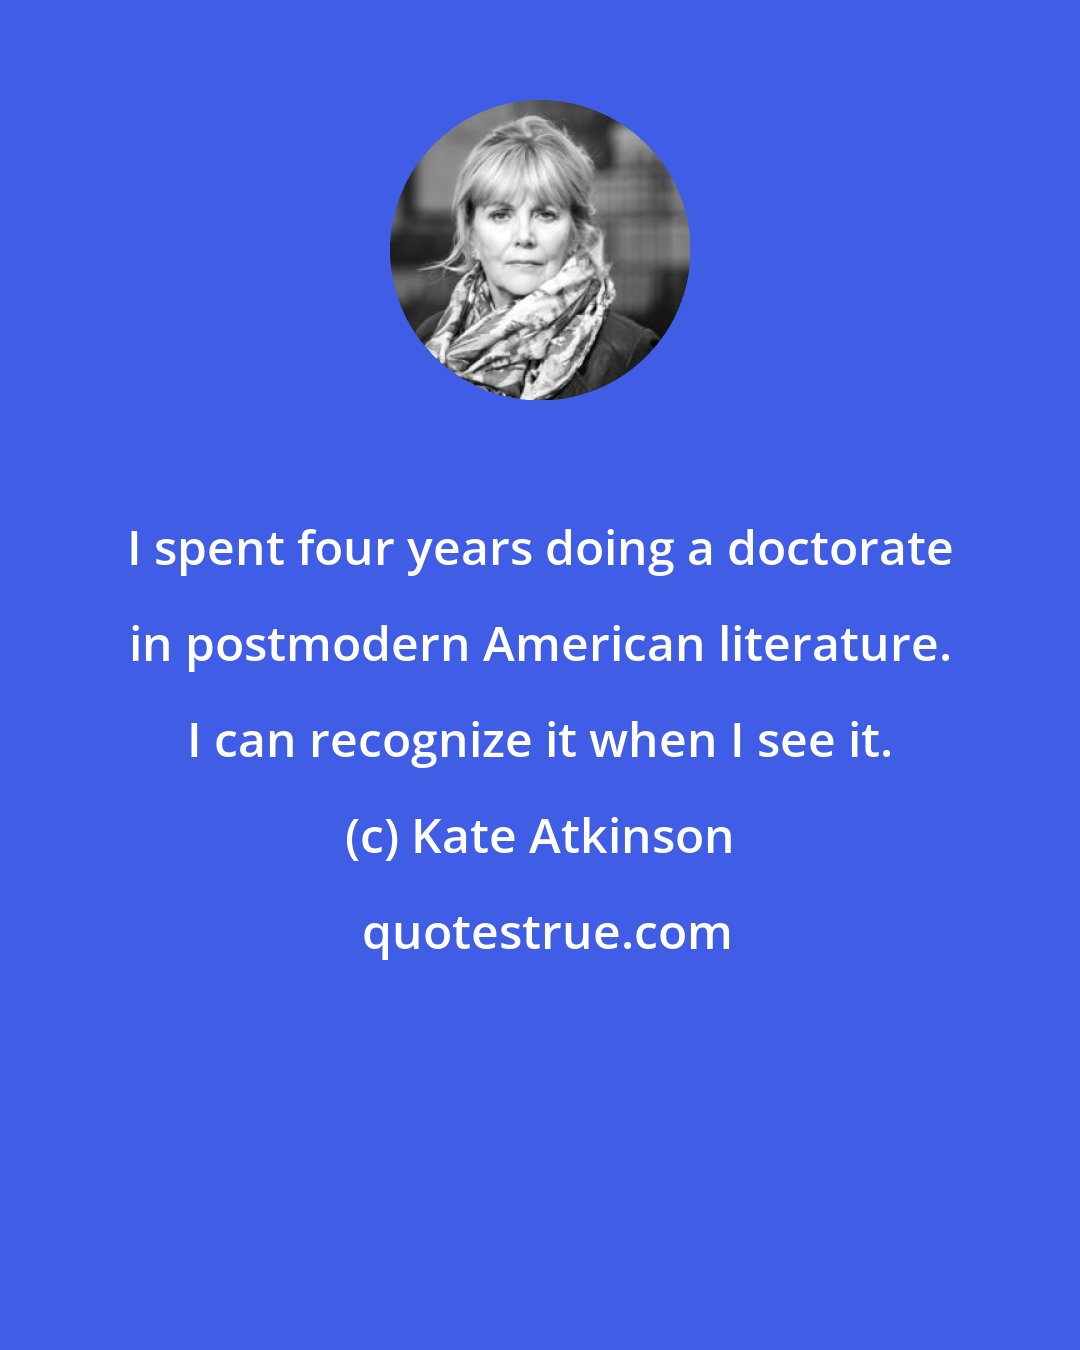 Kate Atkinson: I spent four years doing a doctorate in postmodern American literature. I can recognize it when I see it.